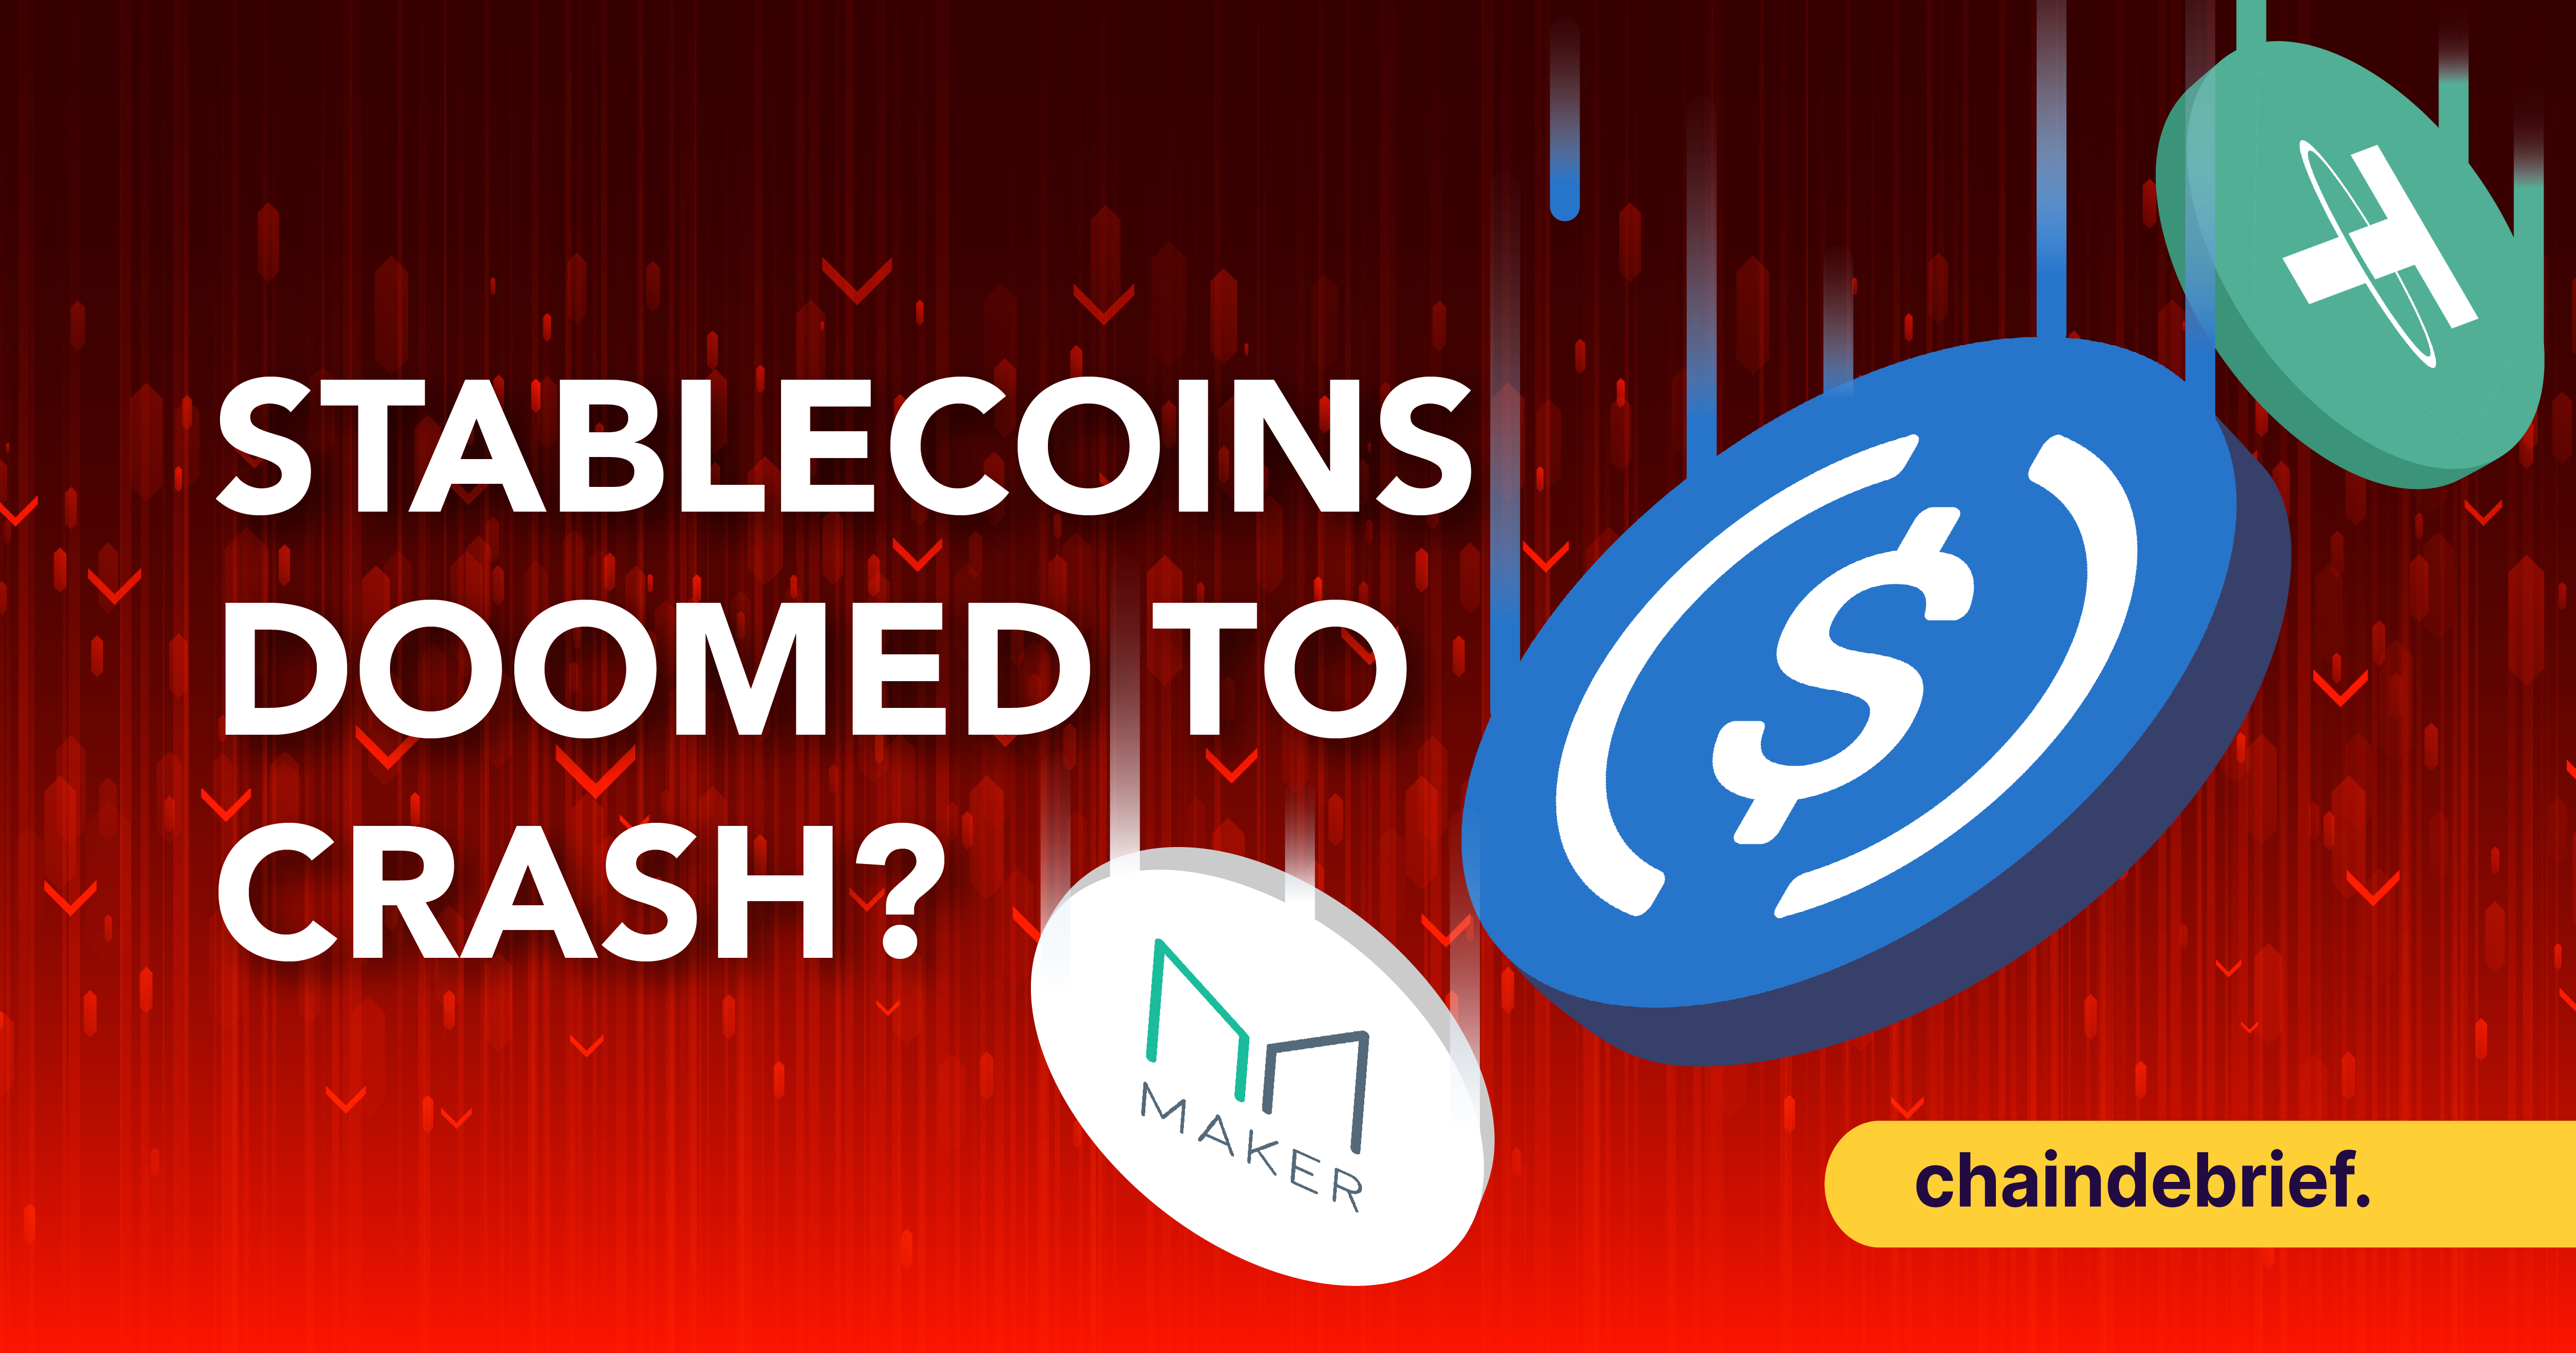 Are All Stablecoins Doomed To Crash? Stablecoin Fundamentals You Have To Know